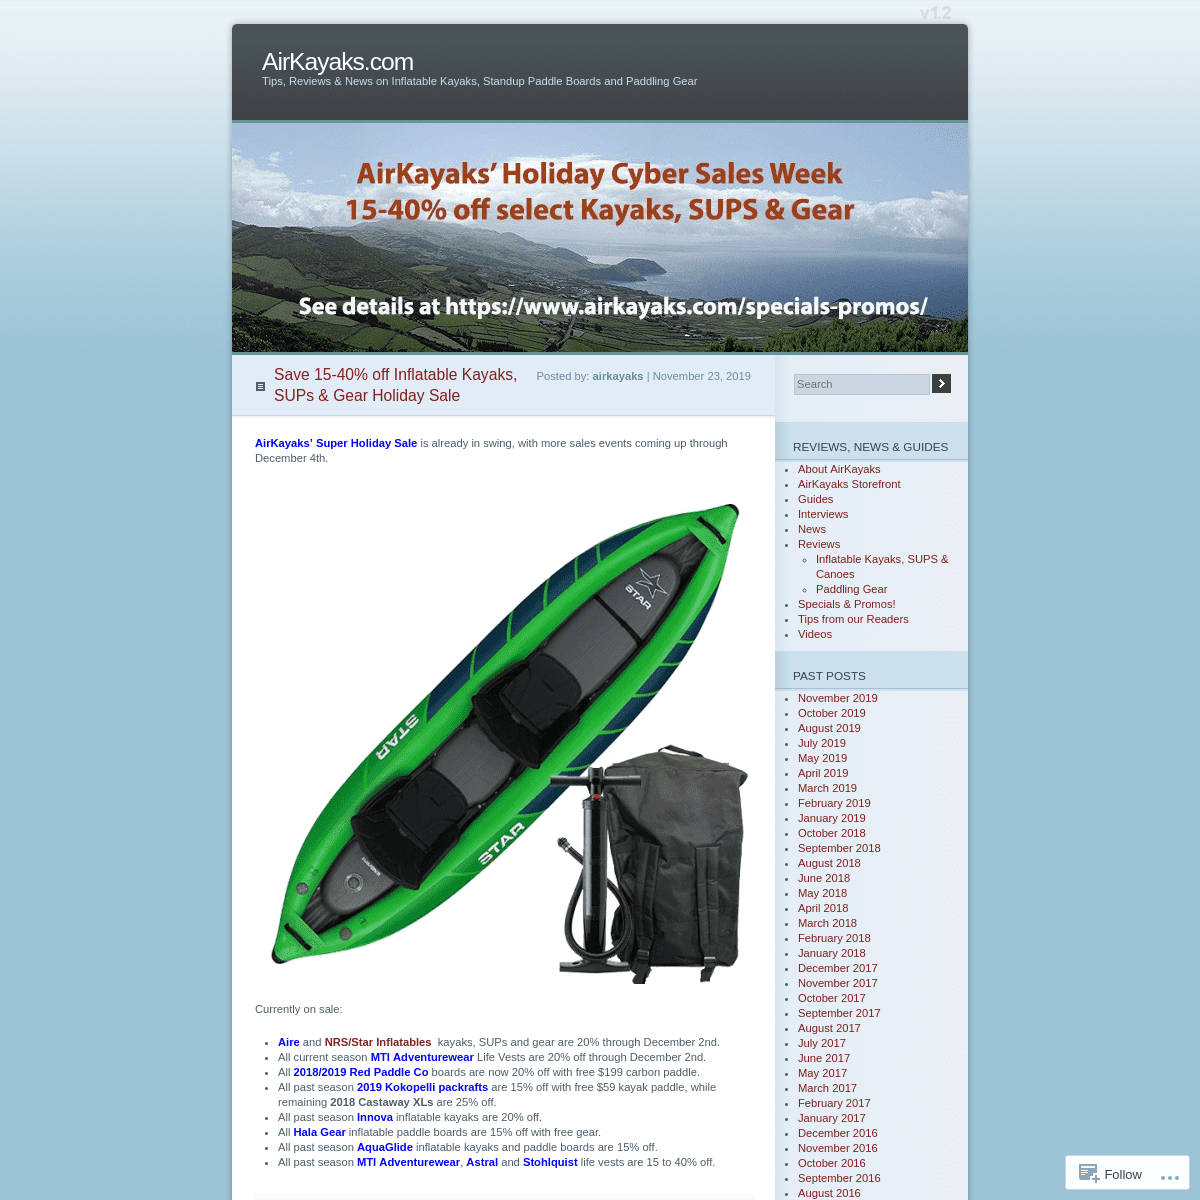 A complete backup of airkayaks.wordpress.com